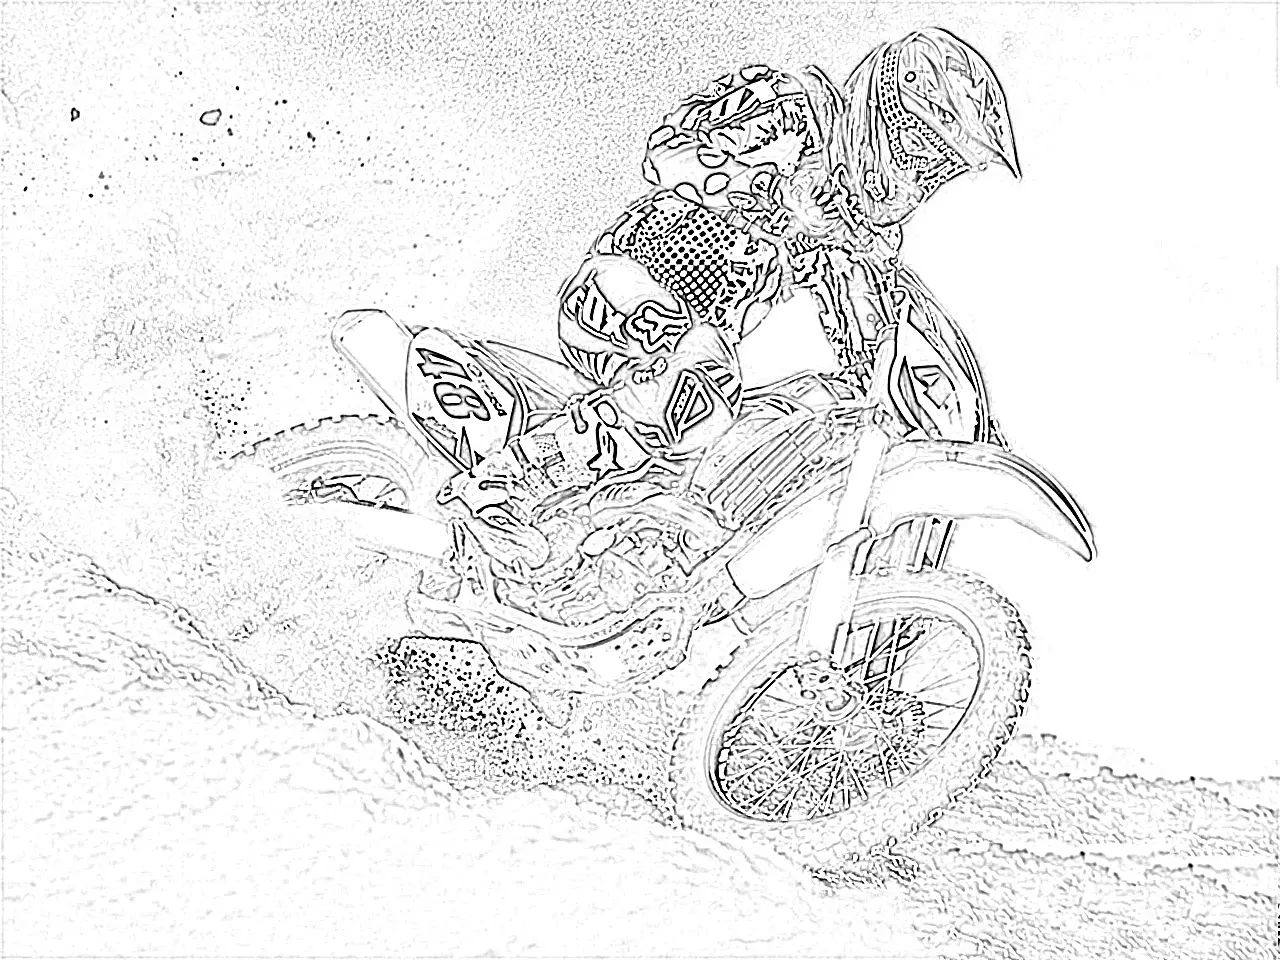 Dirt Bike Coloring Pages Pdf to Print - Dirt Bike Coloring Pages